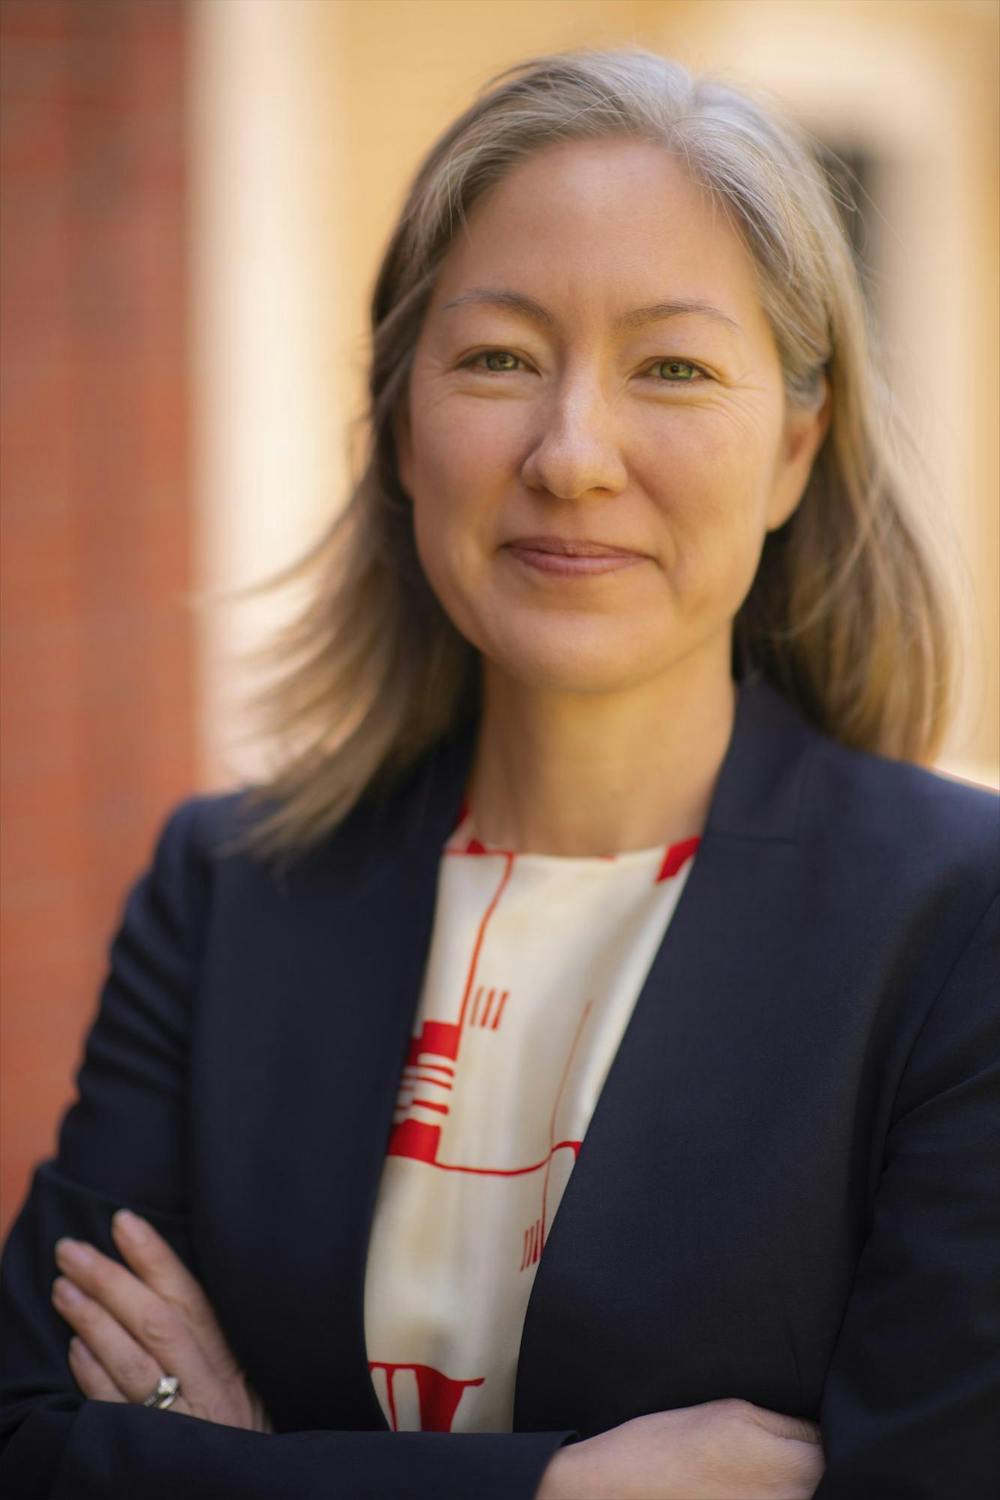 <p>Marisa Angell Brown previously served as associate director of the Rhode Island School of Design’s Center for Complexity and assistant director of programs at Brown University’s John Nicholas Brown Center for Public Humanities and Cultural Heritage.</p><p>Courtesy of Marisa Angell Brown</p>